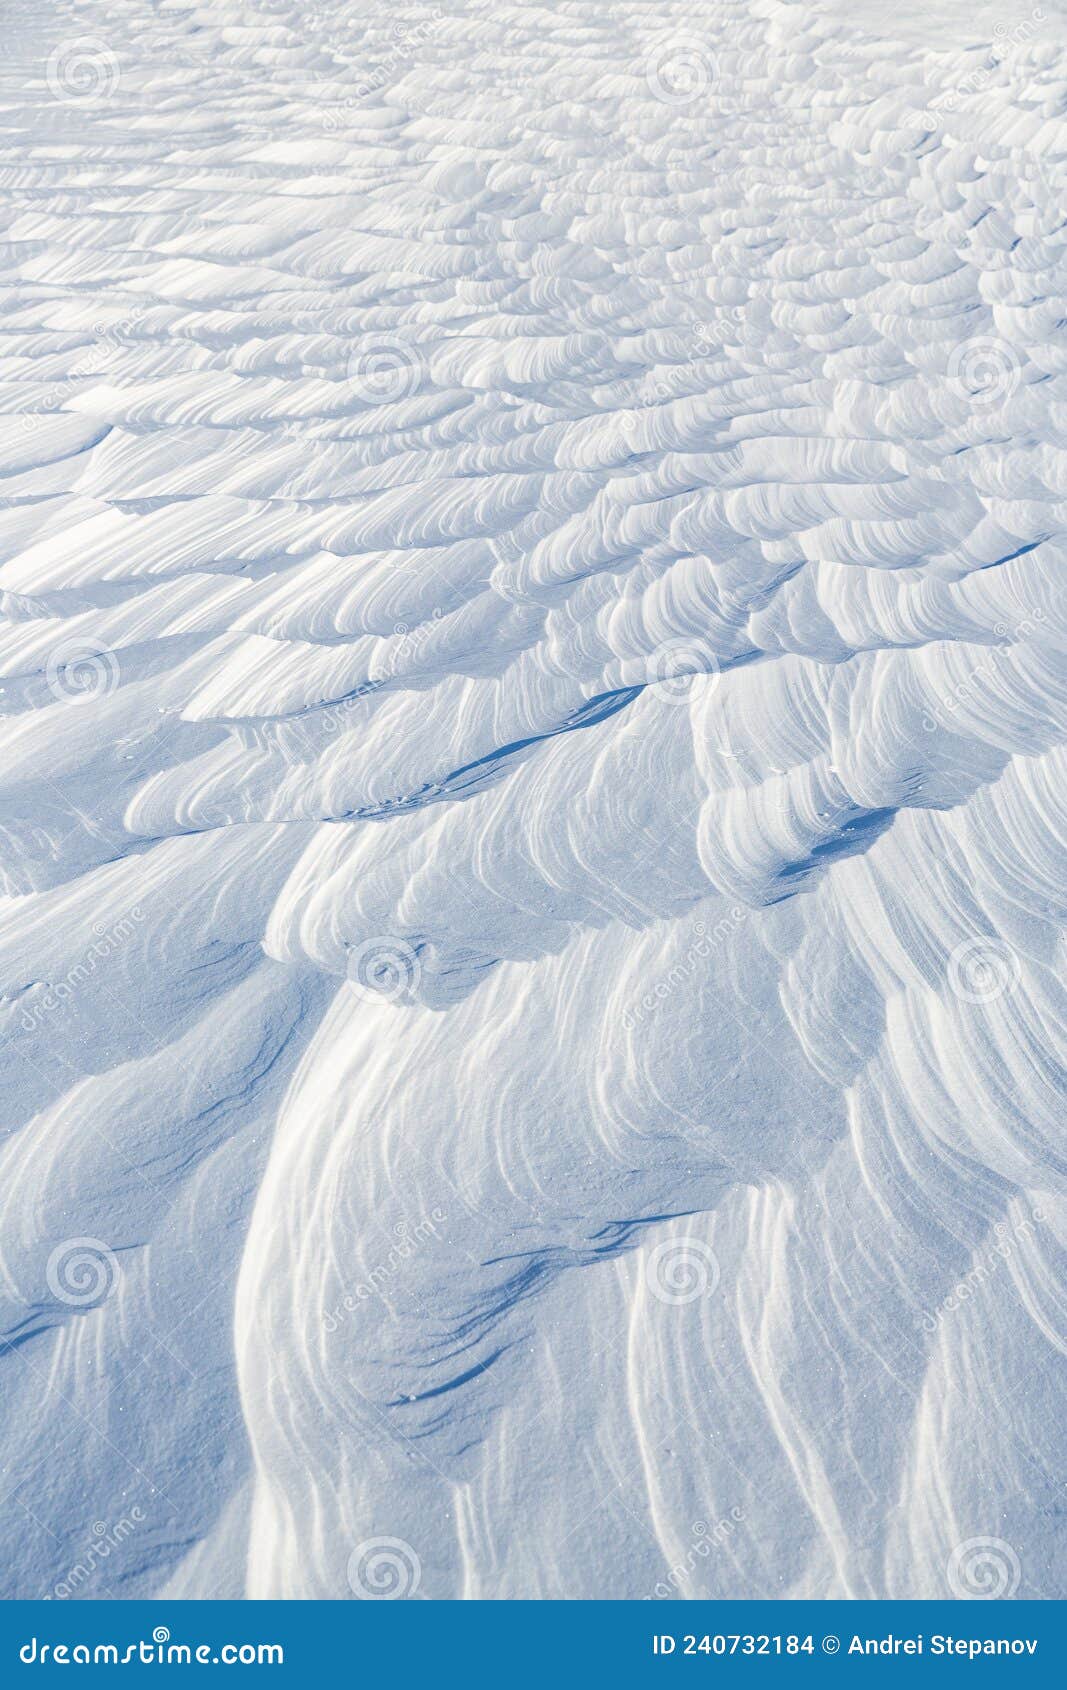 Snow Texture. Wind Sculpted Patterns on Snow Surface Stock Photo ...